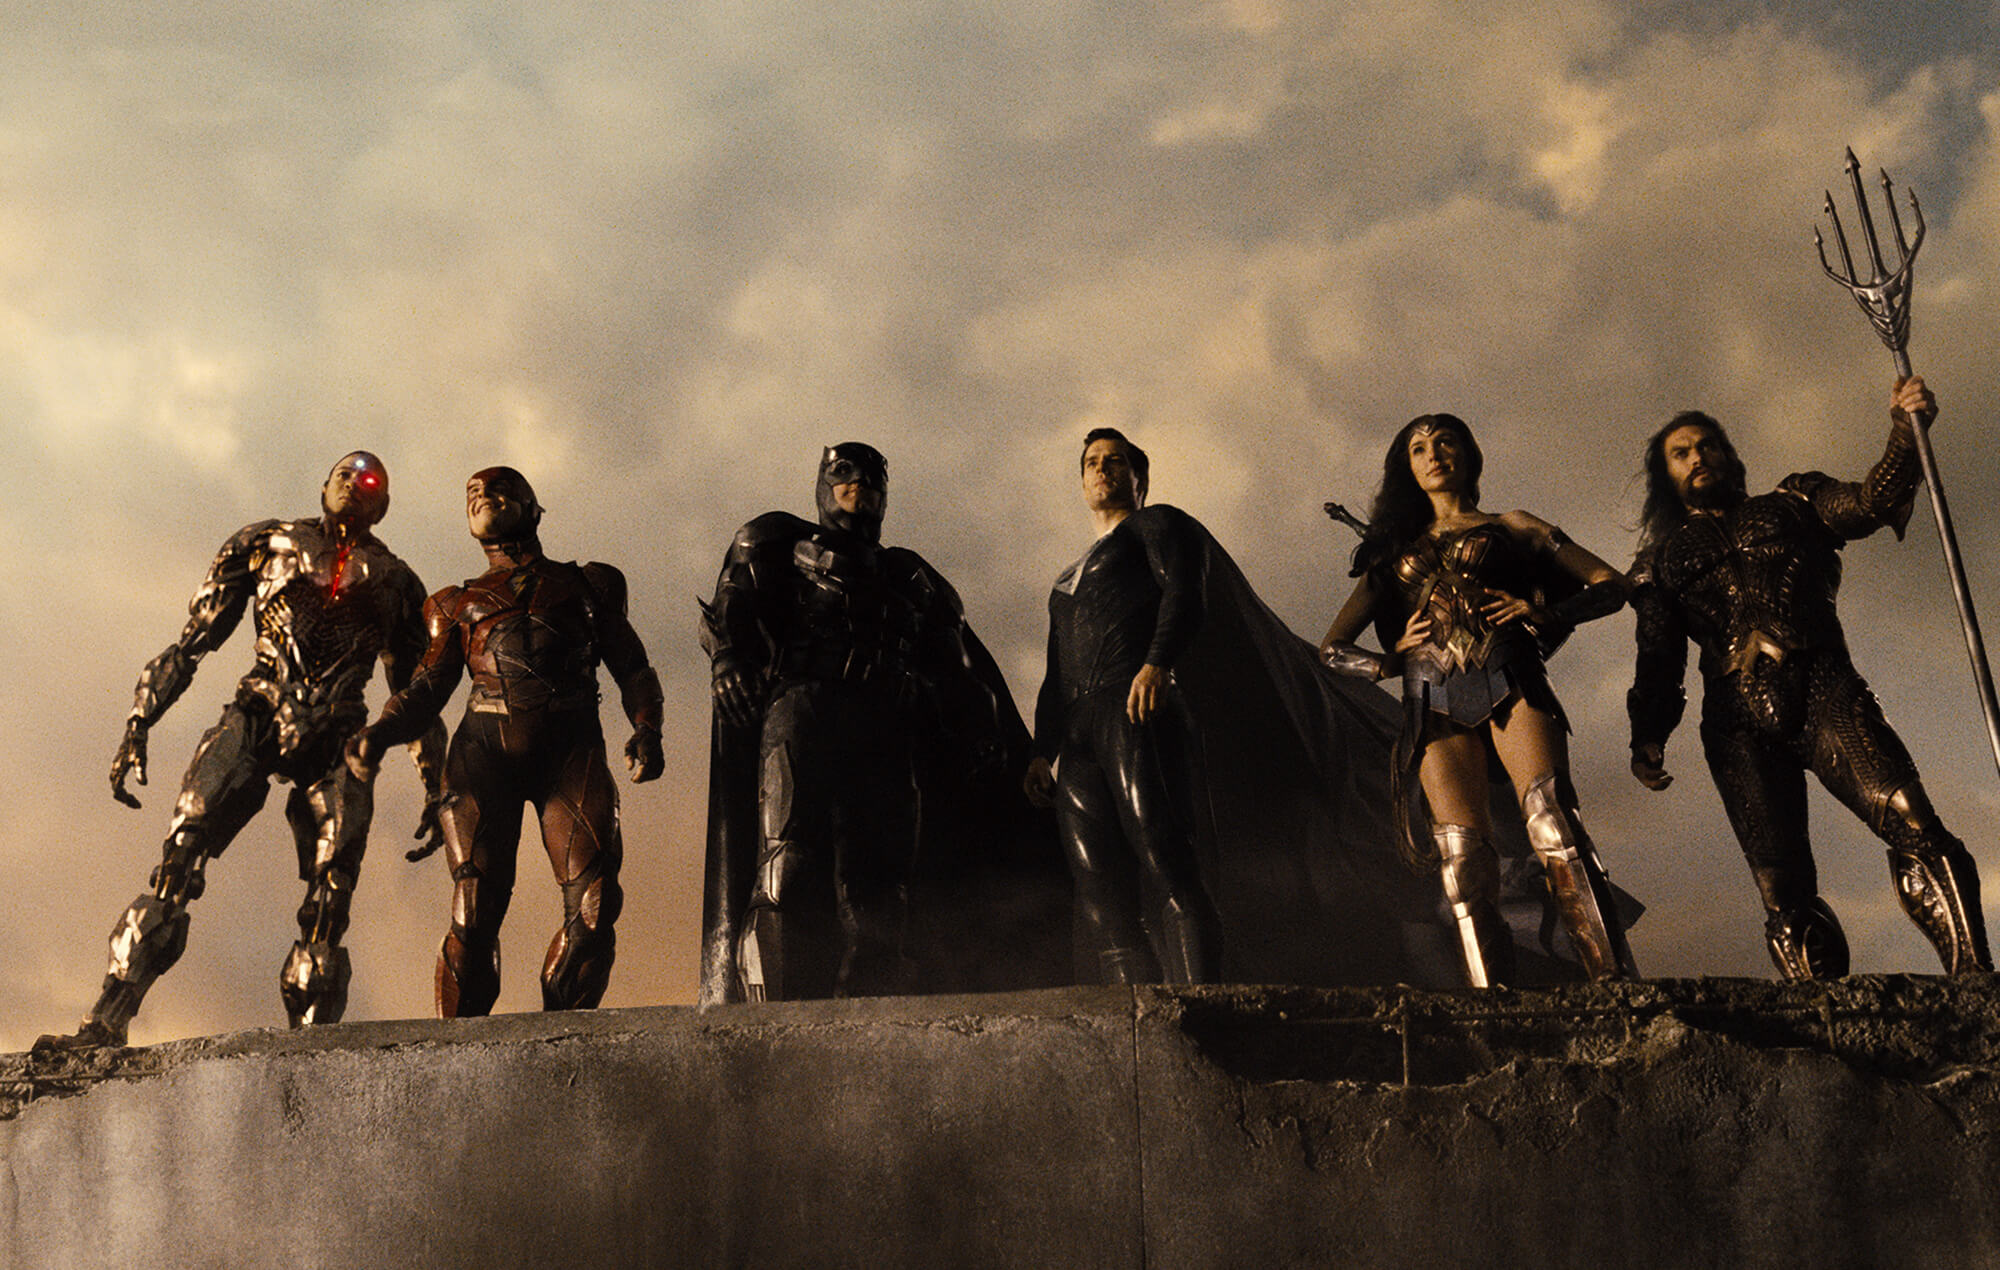 Overrated Popular Films - zack snyder's justice league